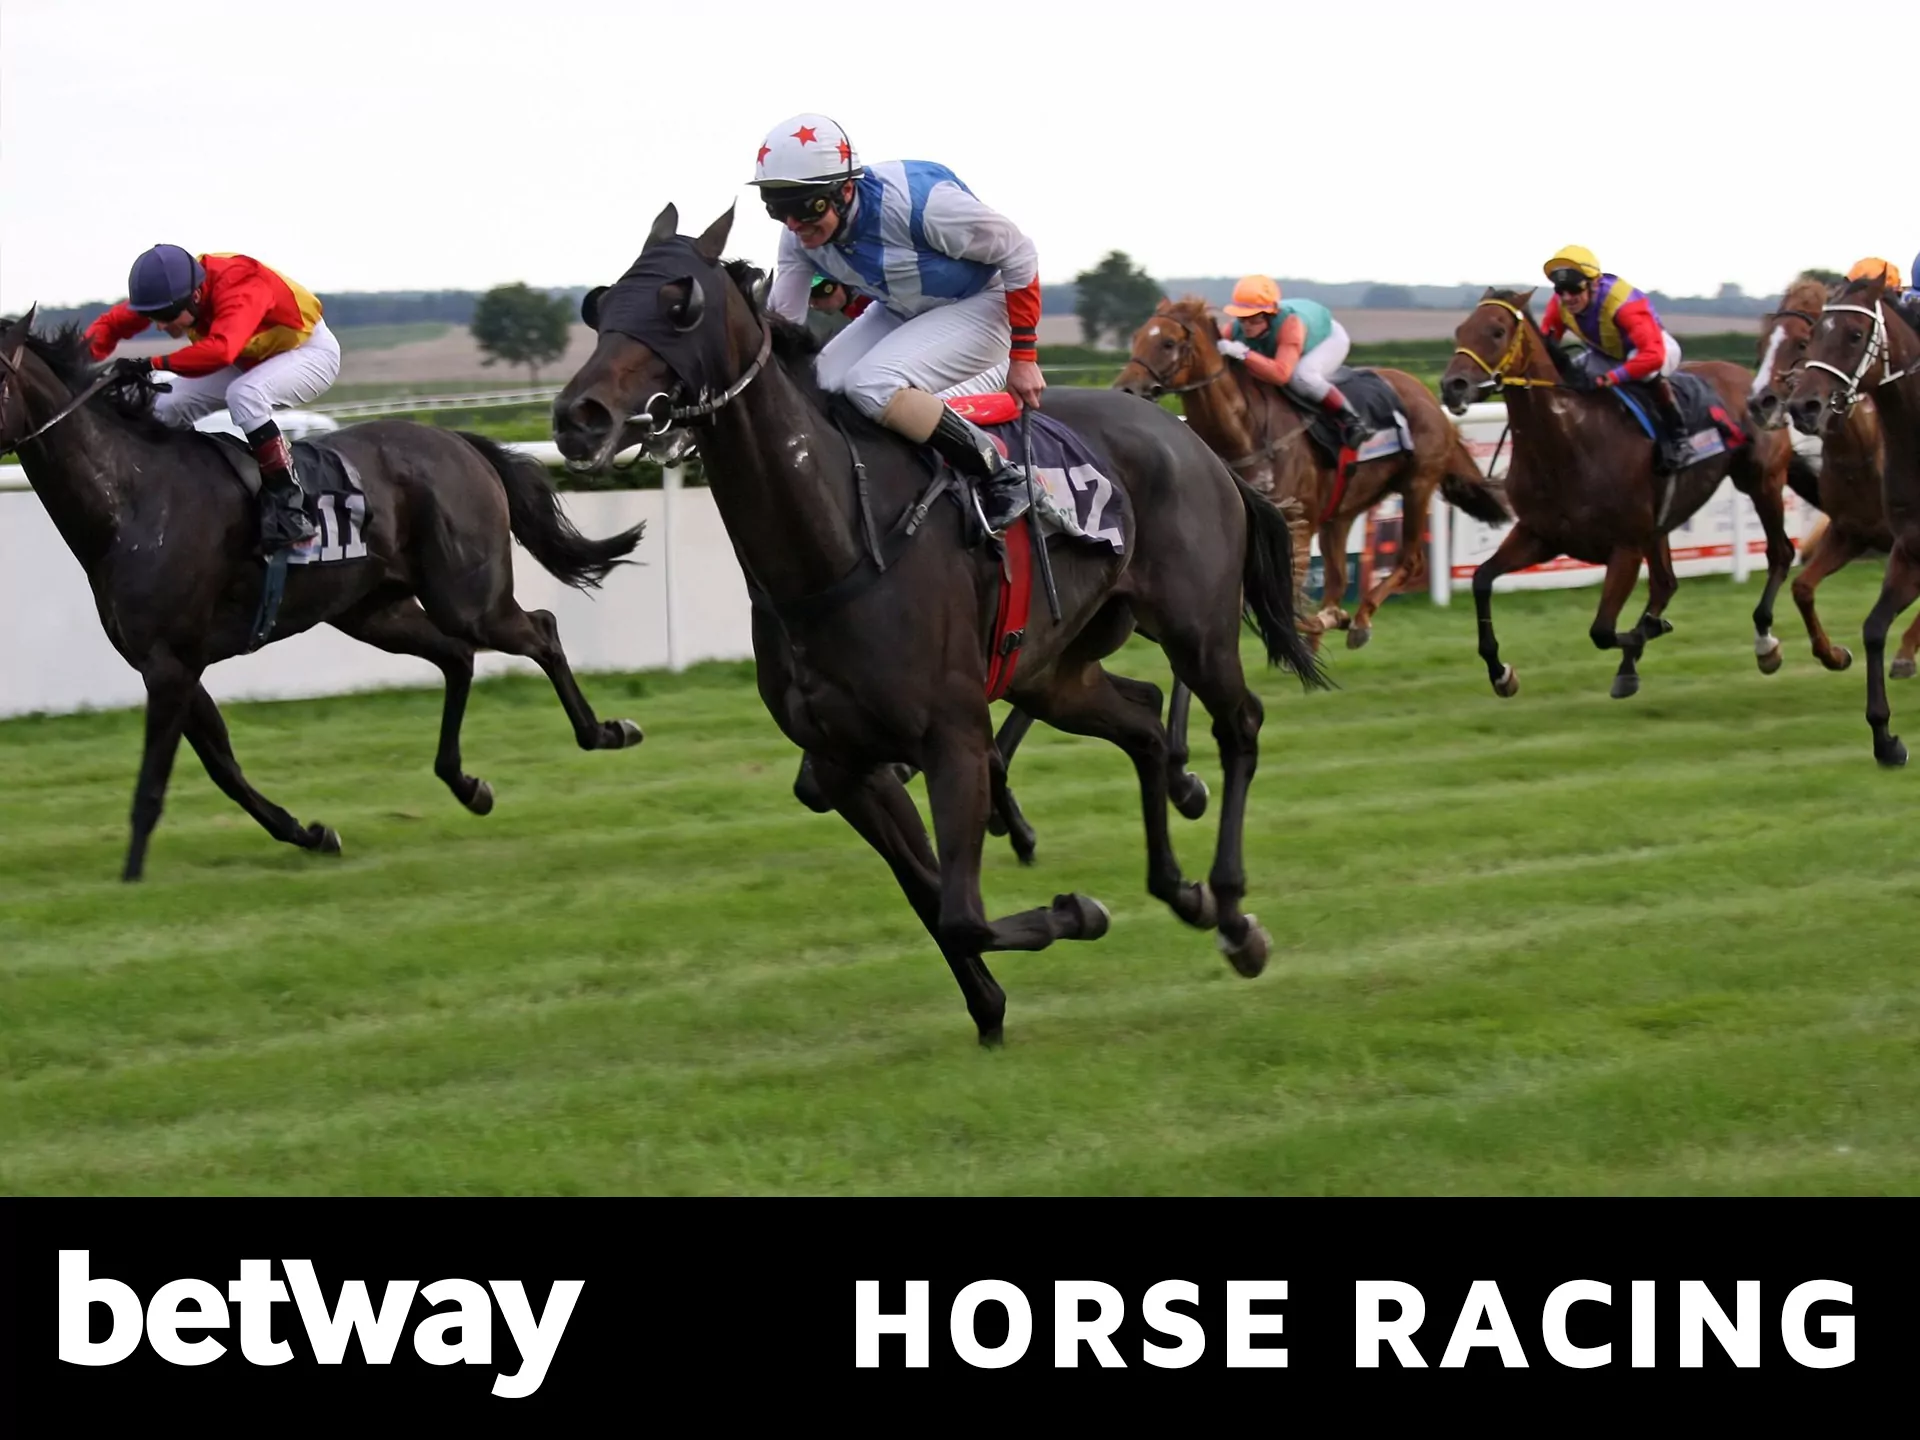 Horse racing betting on Betway.